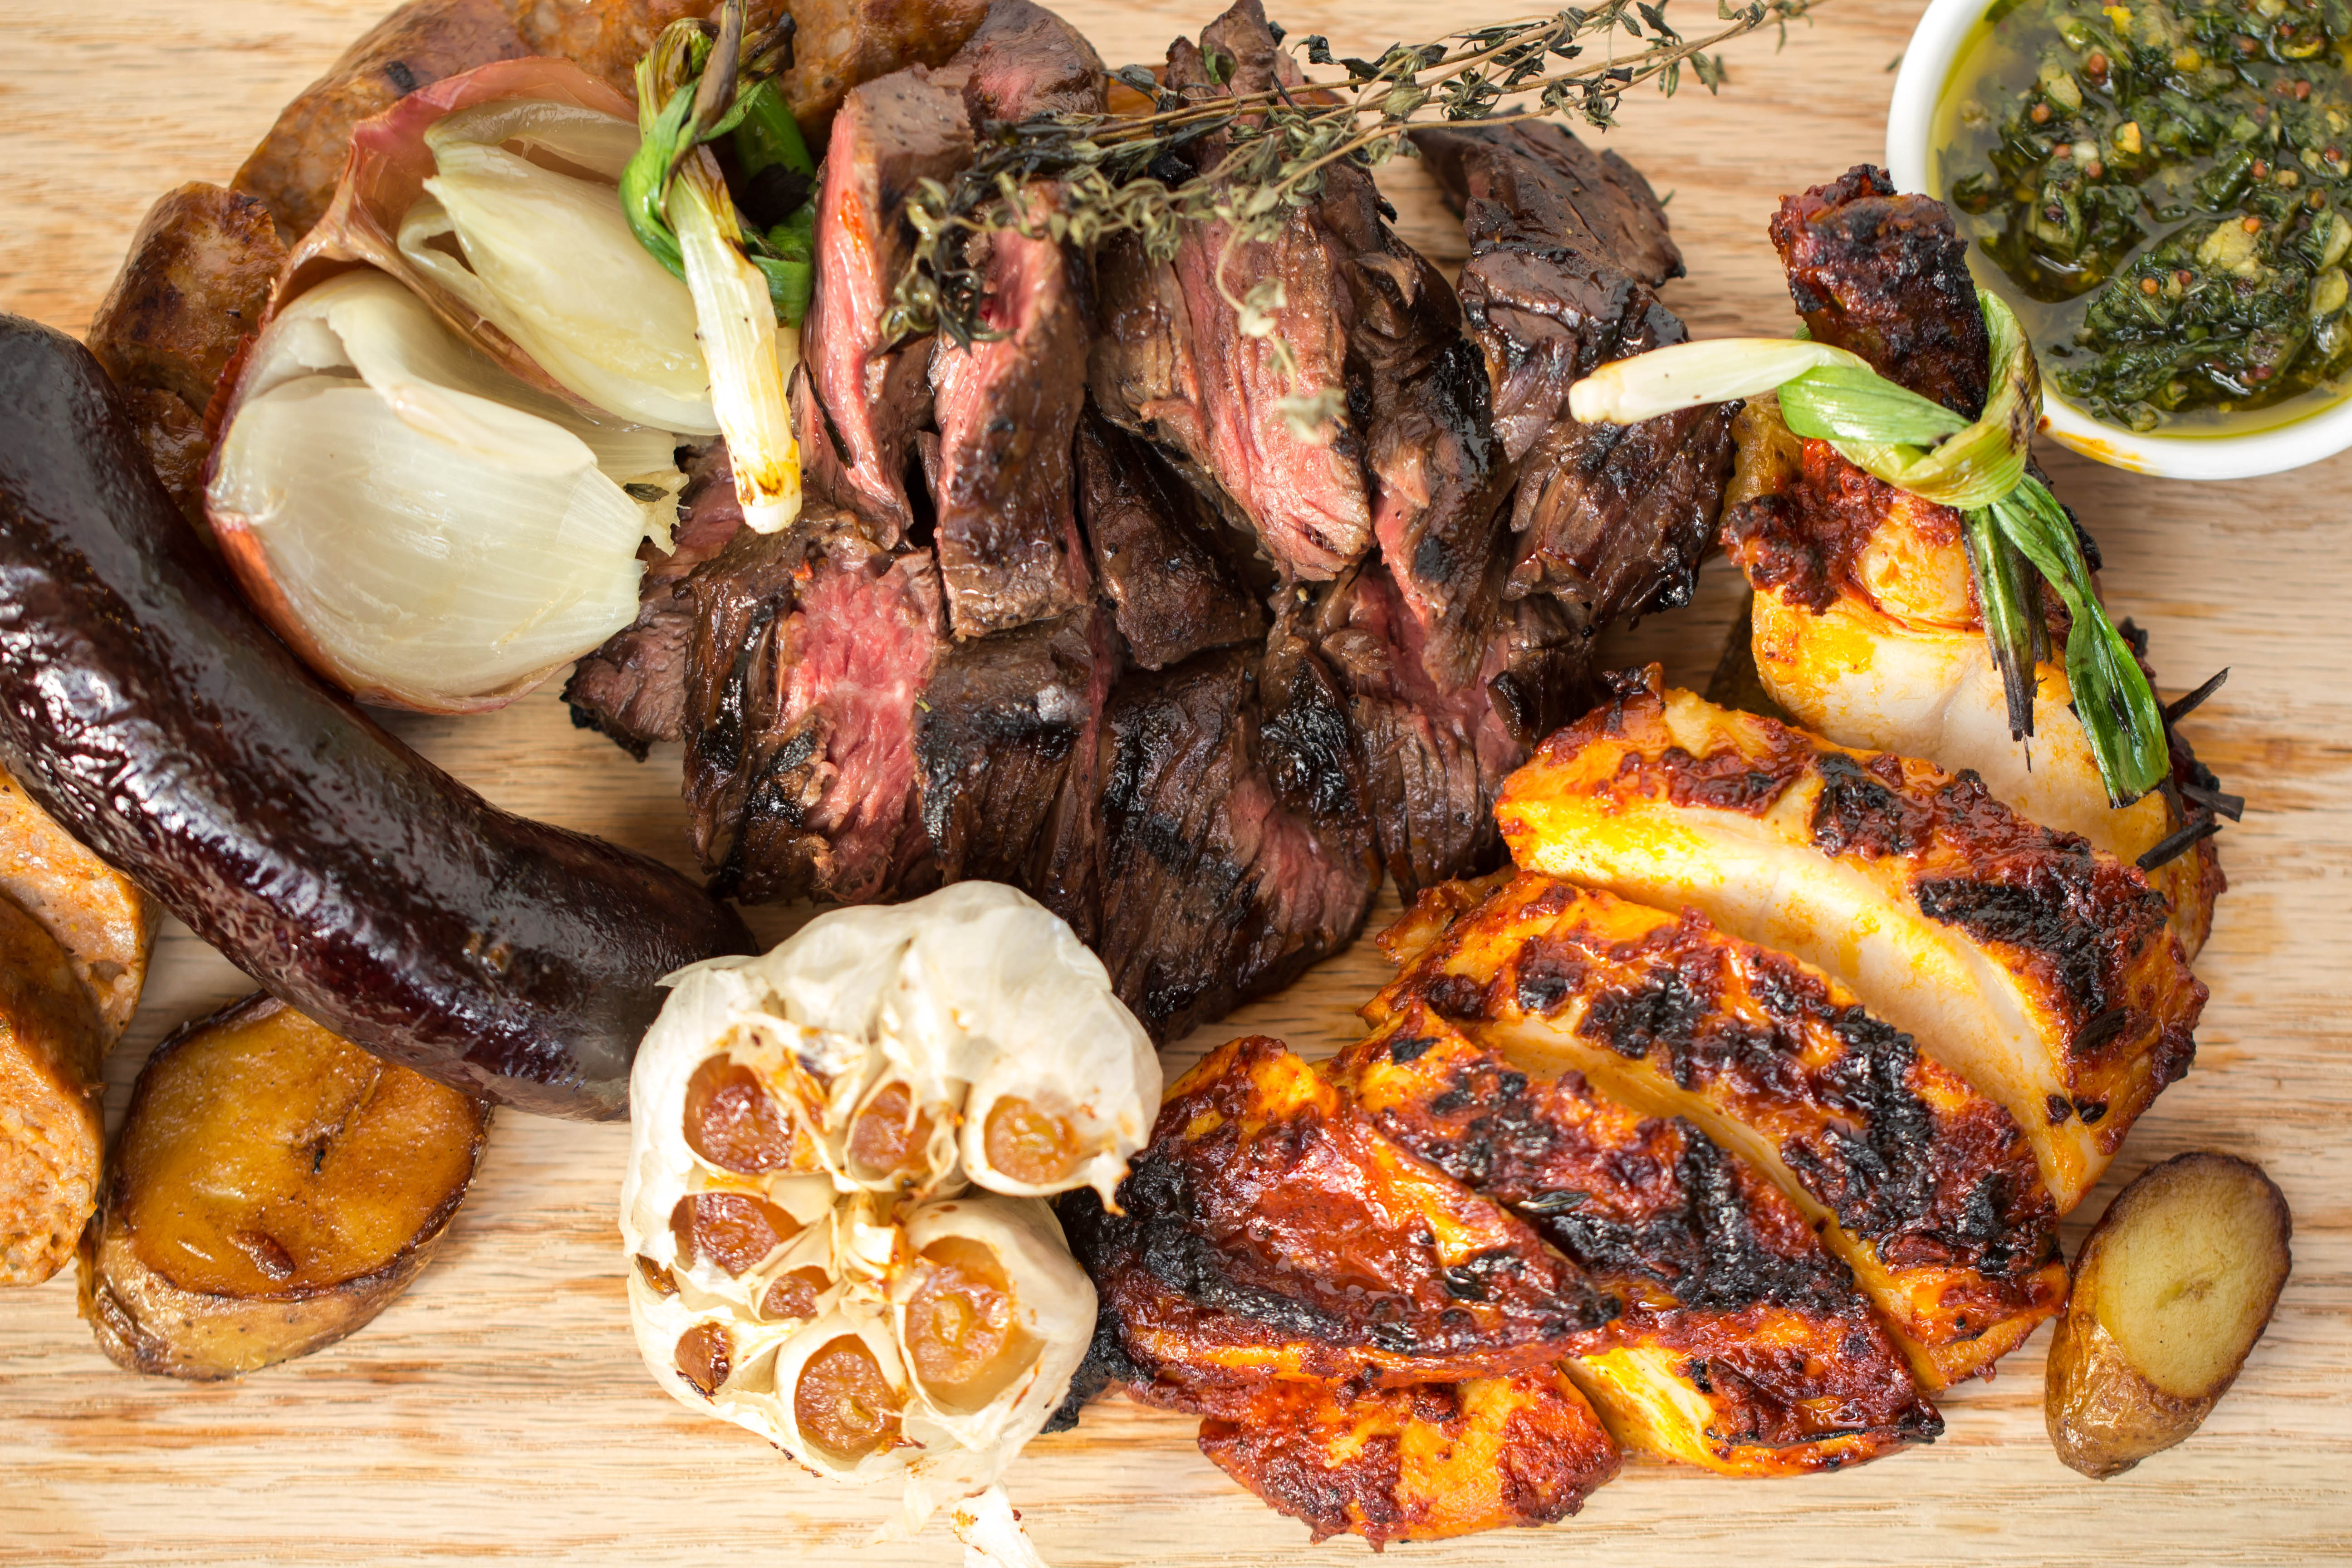 The Argentinian parrillada mixed grill for two with hanger steak, sweet chorizo, blood sausage, grilled chicken breast and black truffle chimichurri on Zengo's TK menu. (Photo: Zengo)